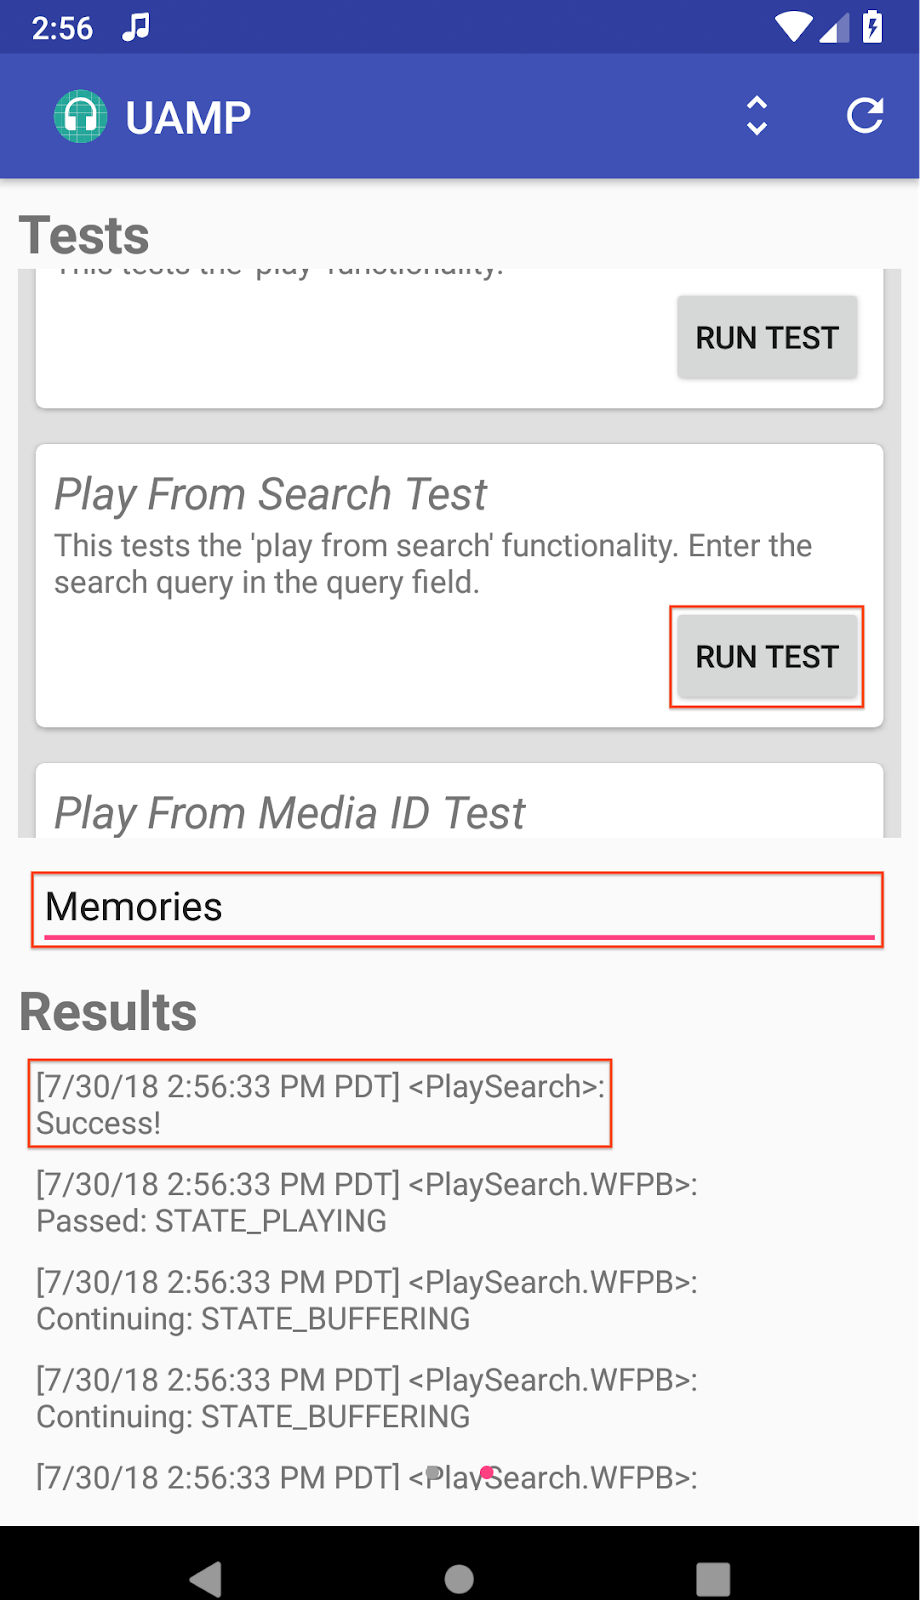 MCT Screenshot of the right screen in the Testing view for UAMP; the Play From Search test was run with the query 'Memories' and ended successfully.